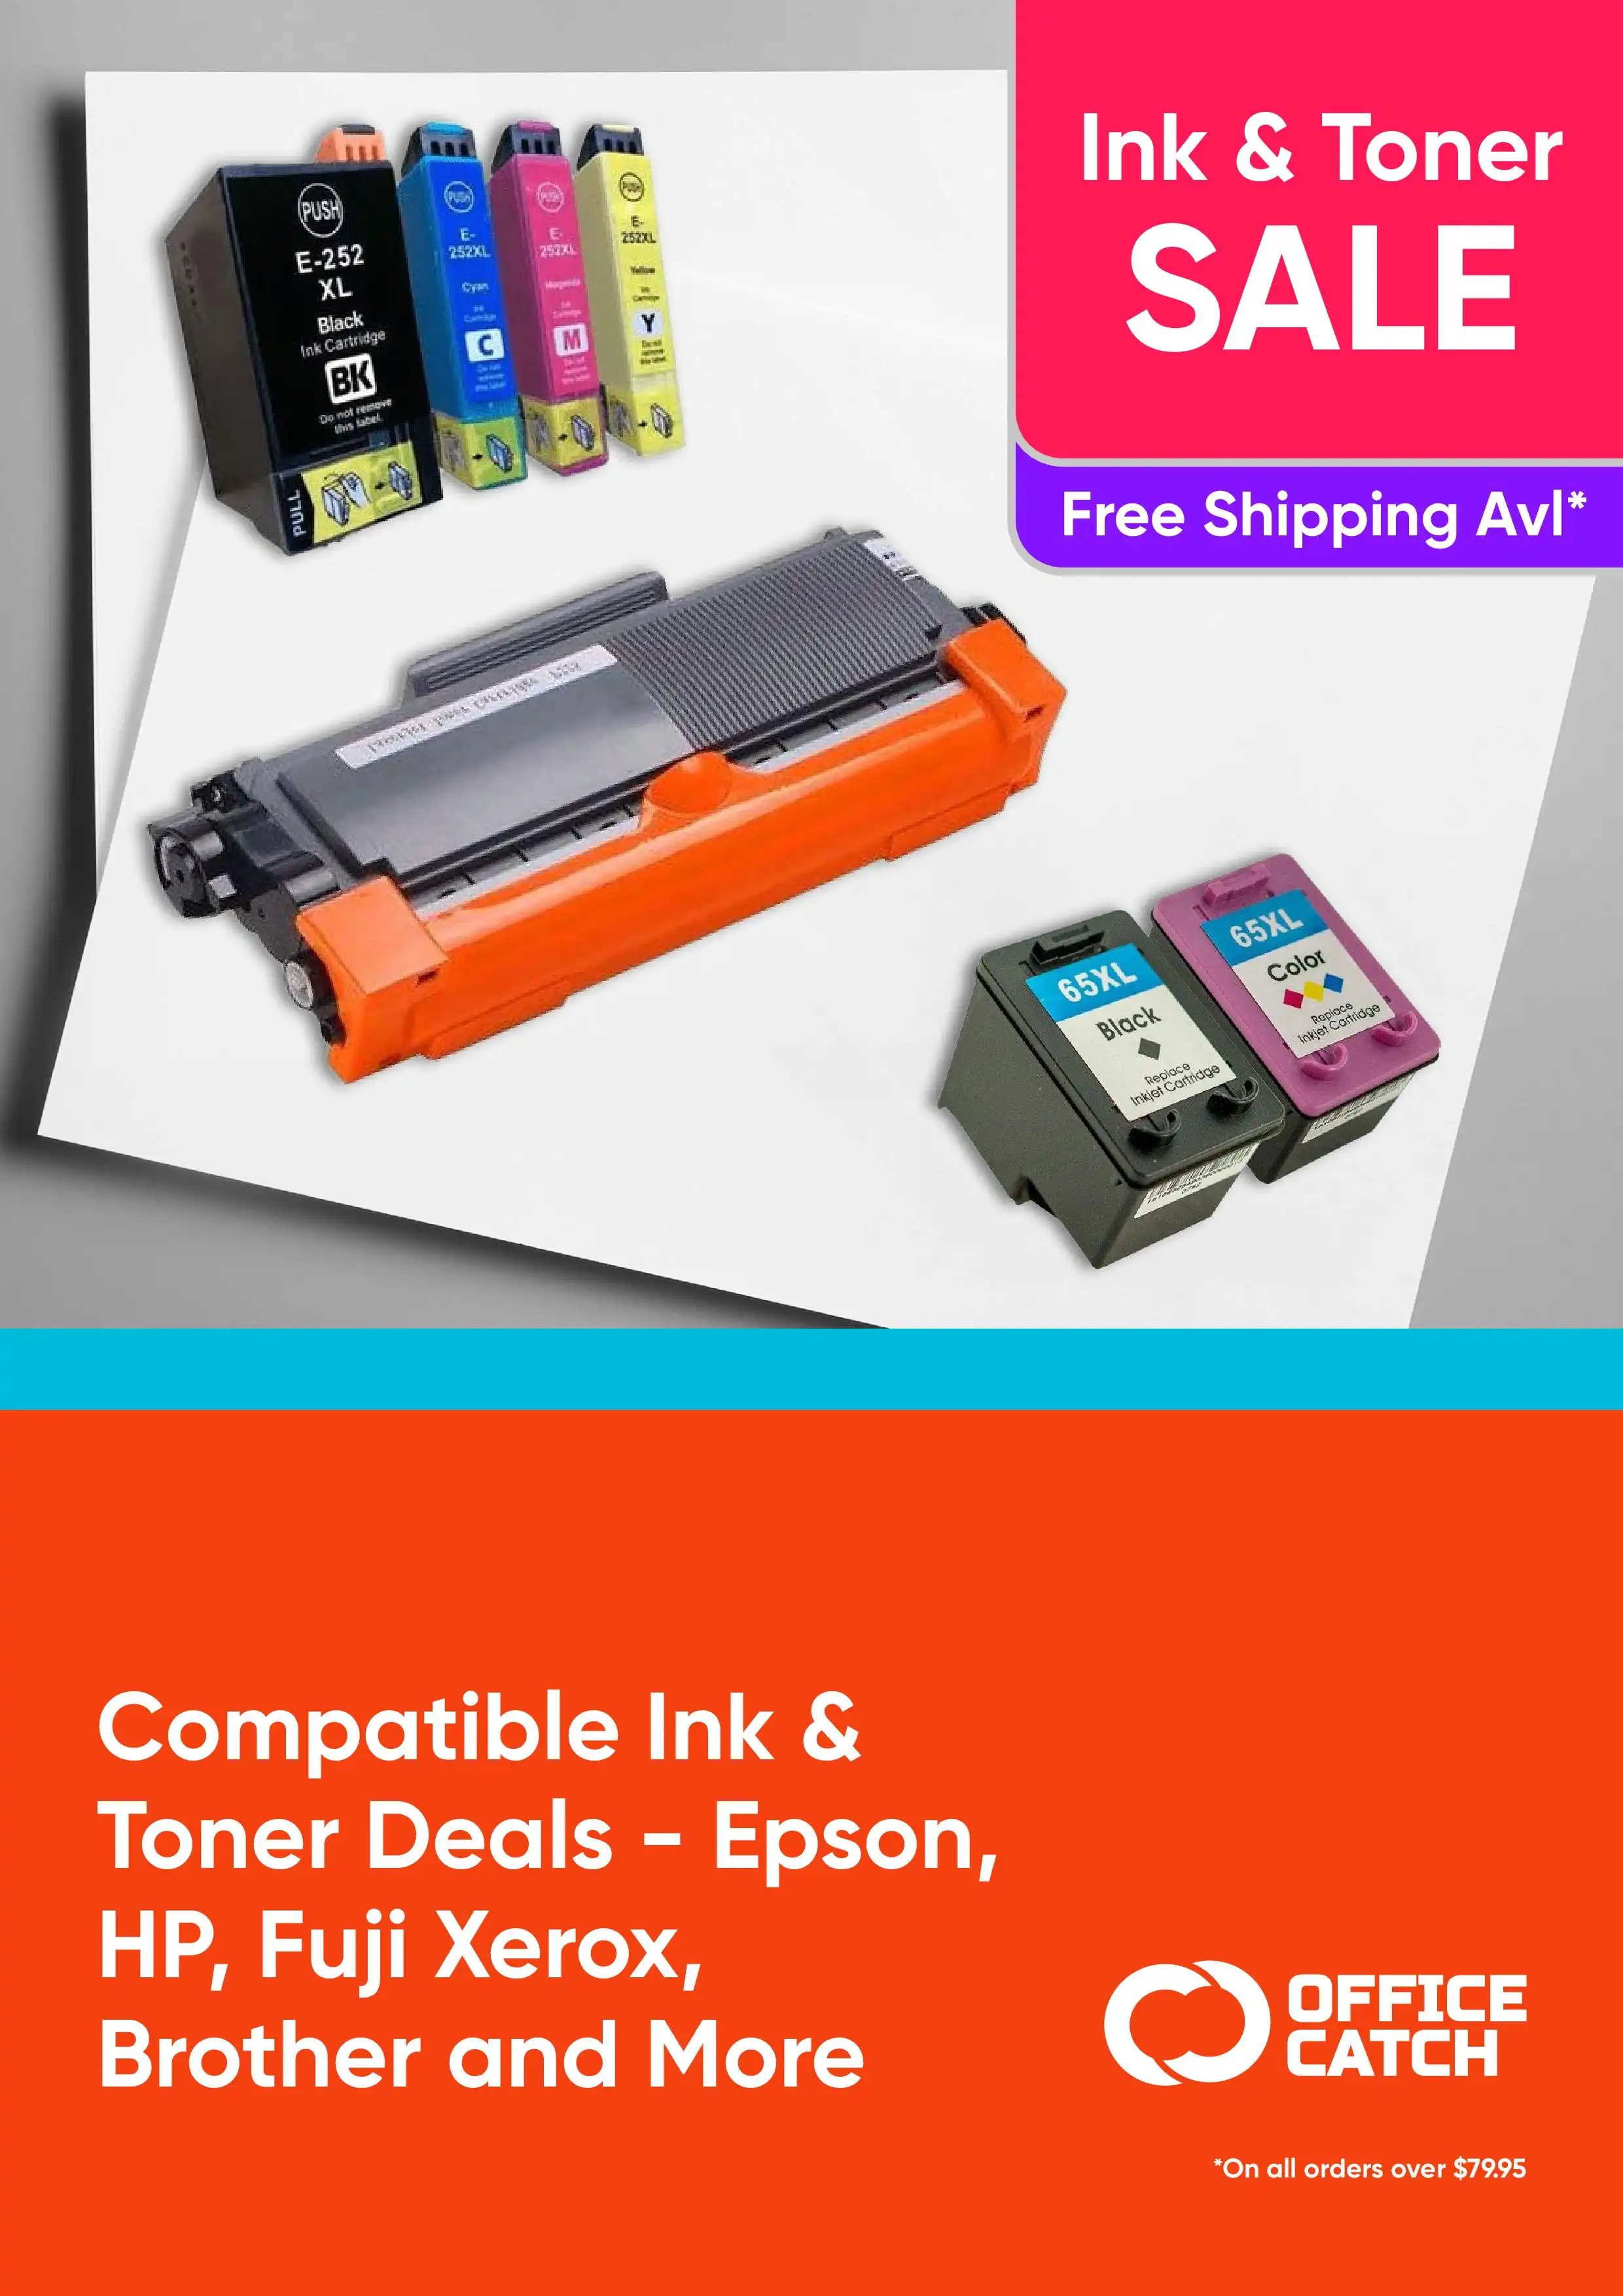 Compatible Ink & Toner Deals - Epson, HP, Fuji Xerox, Brother and More